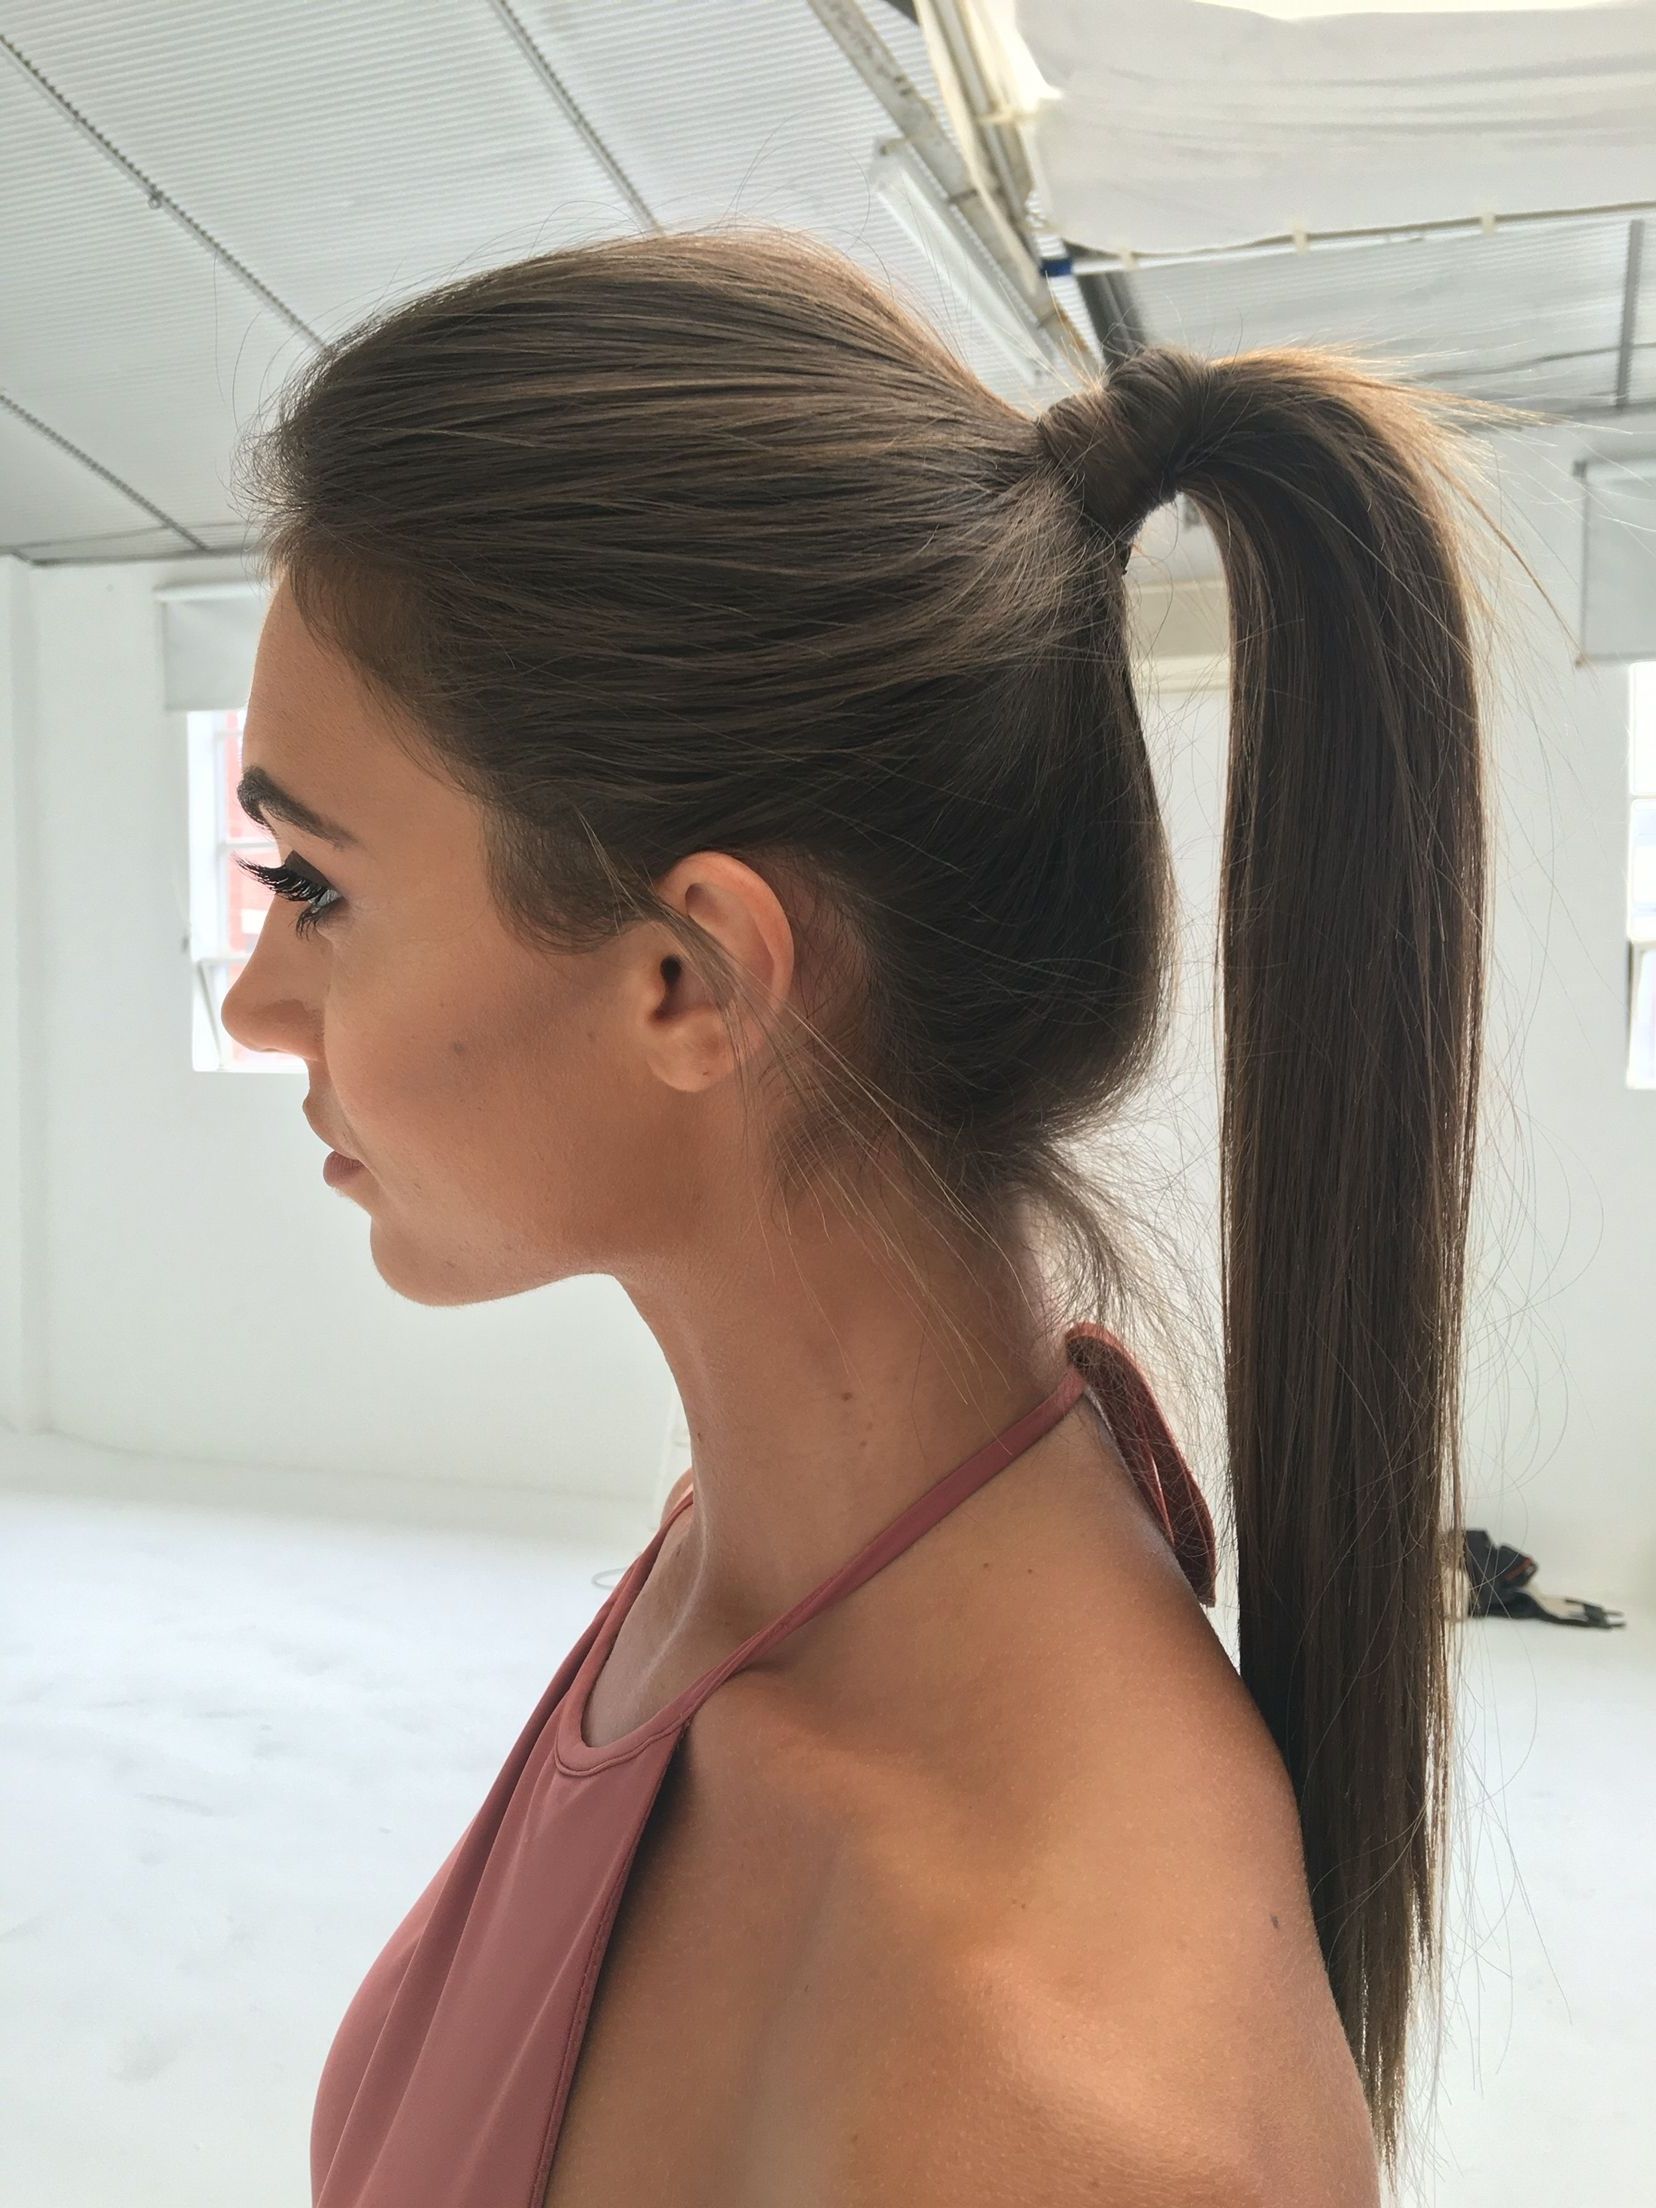 Prom Intended For Current High Sleek Ponytail Hairstyles (Gallery 13 of 20)